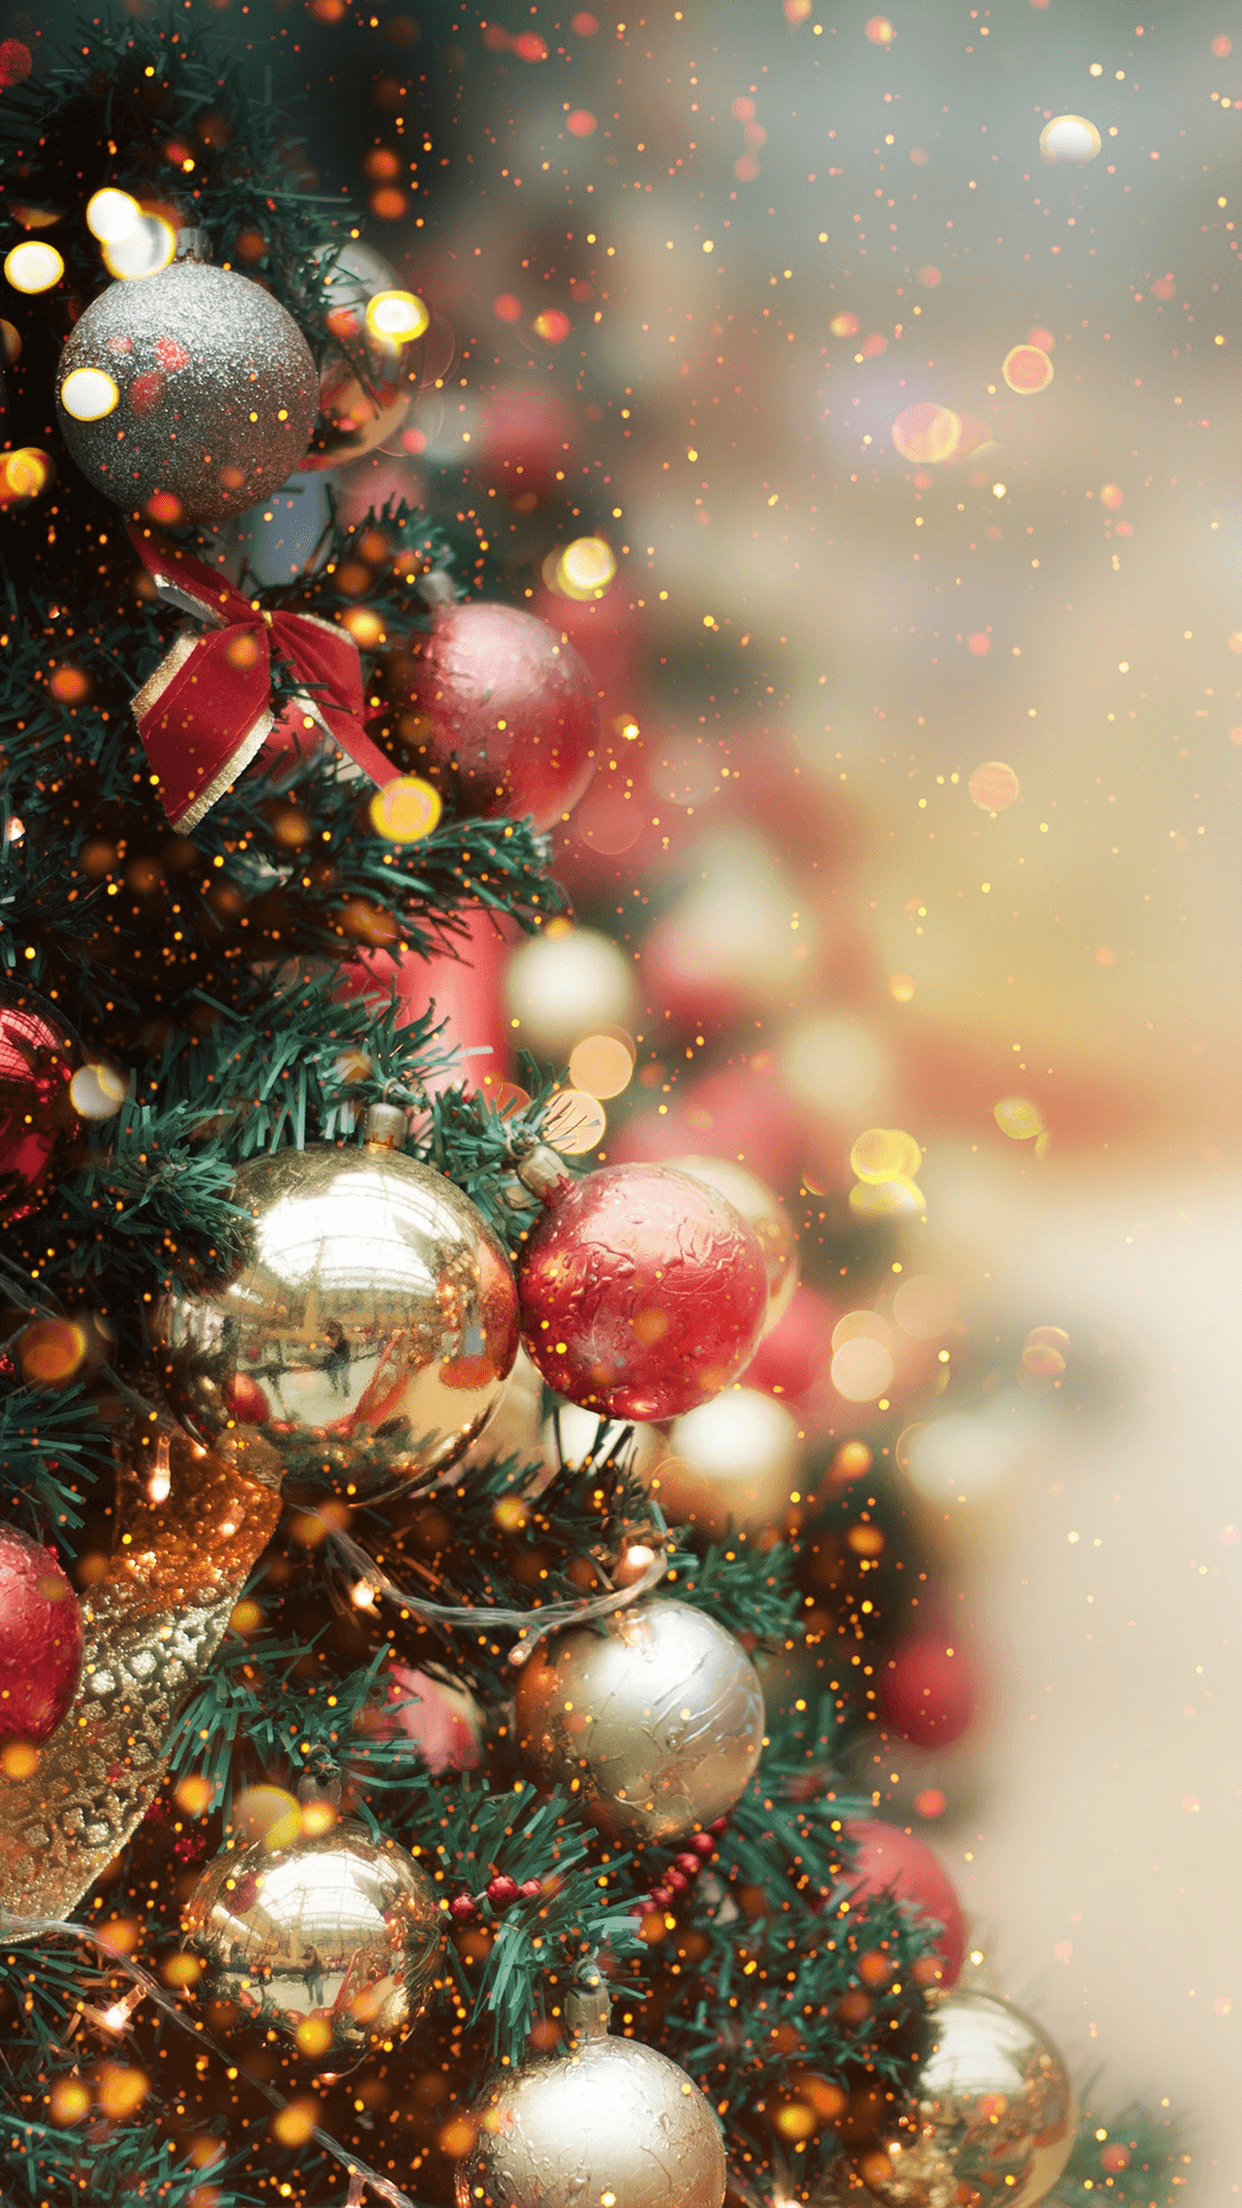 Download wallpaper 800x1420 christmas toy, tree, christmas, new year, blur,  decoration iphone se/5s/5c/5 for parallax hd background